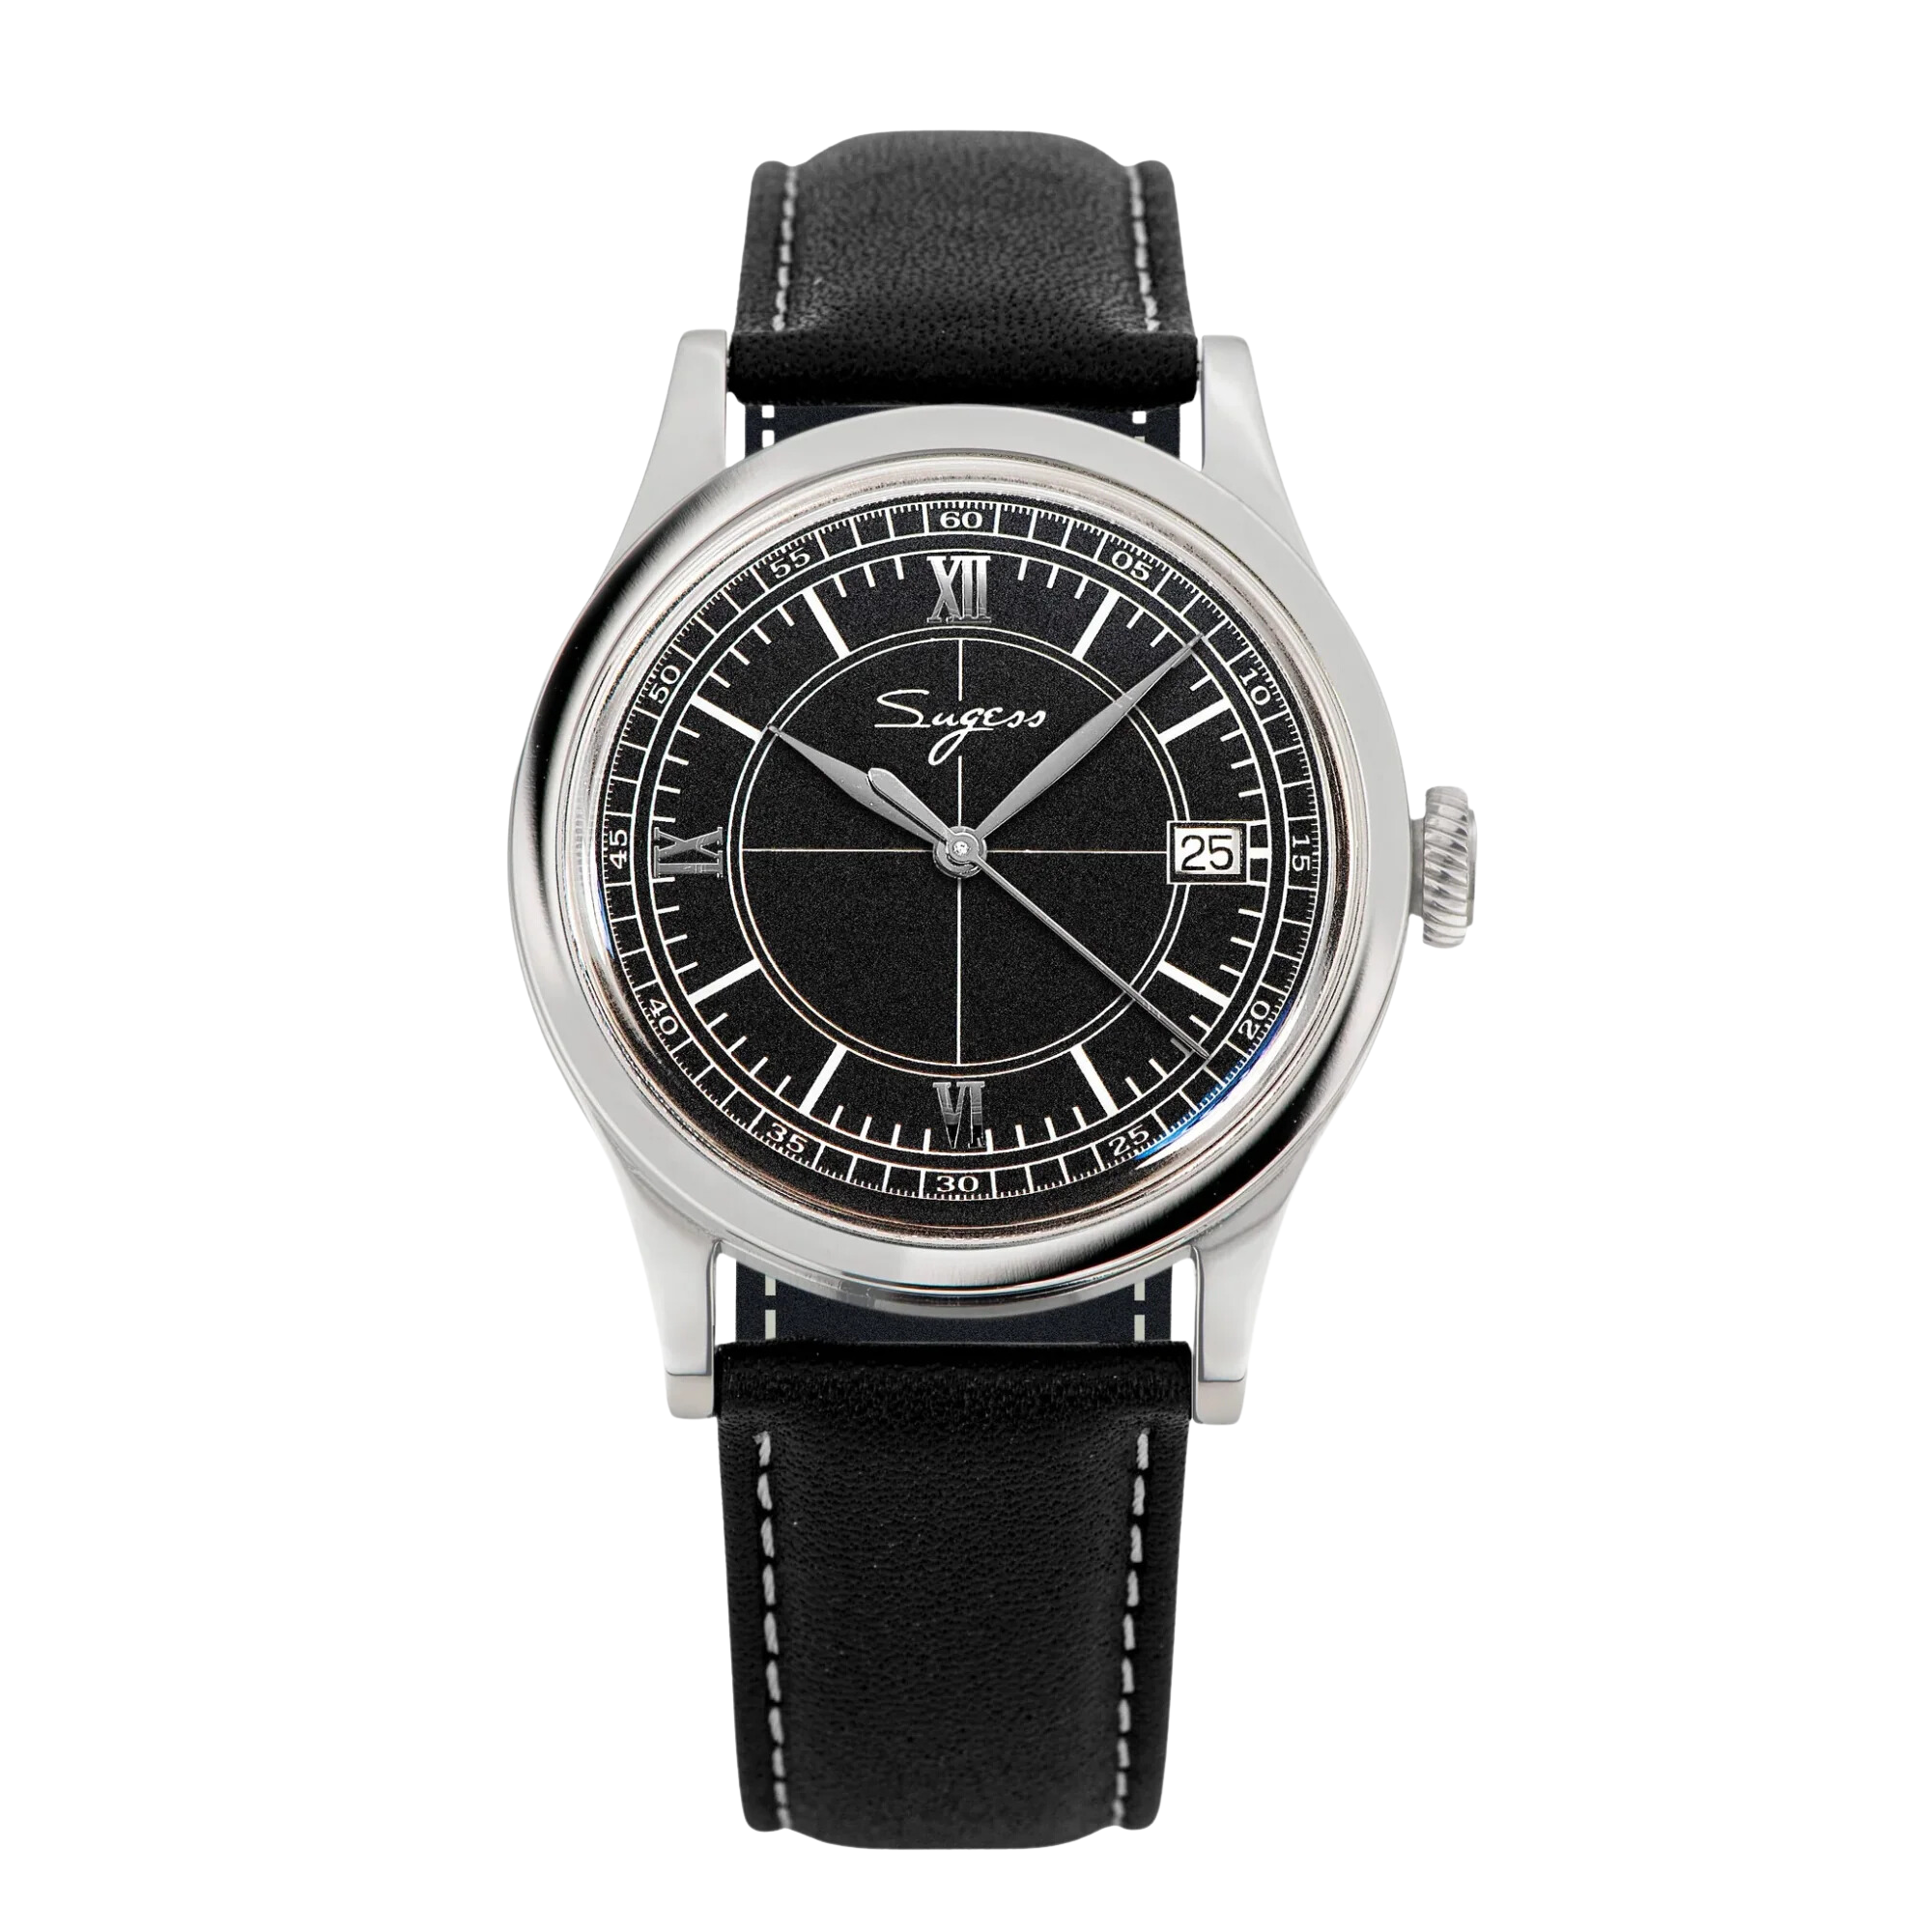 Sugess Heritage S411-3B Seagull 2130 Movement Stainless Steel Case Deep Black Dial SU4113BBK watch dream-watches.com india